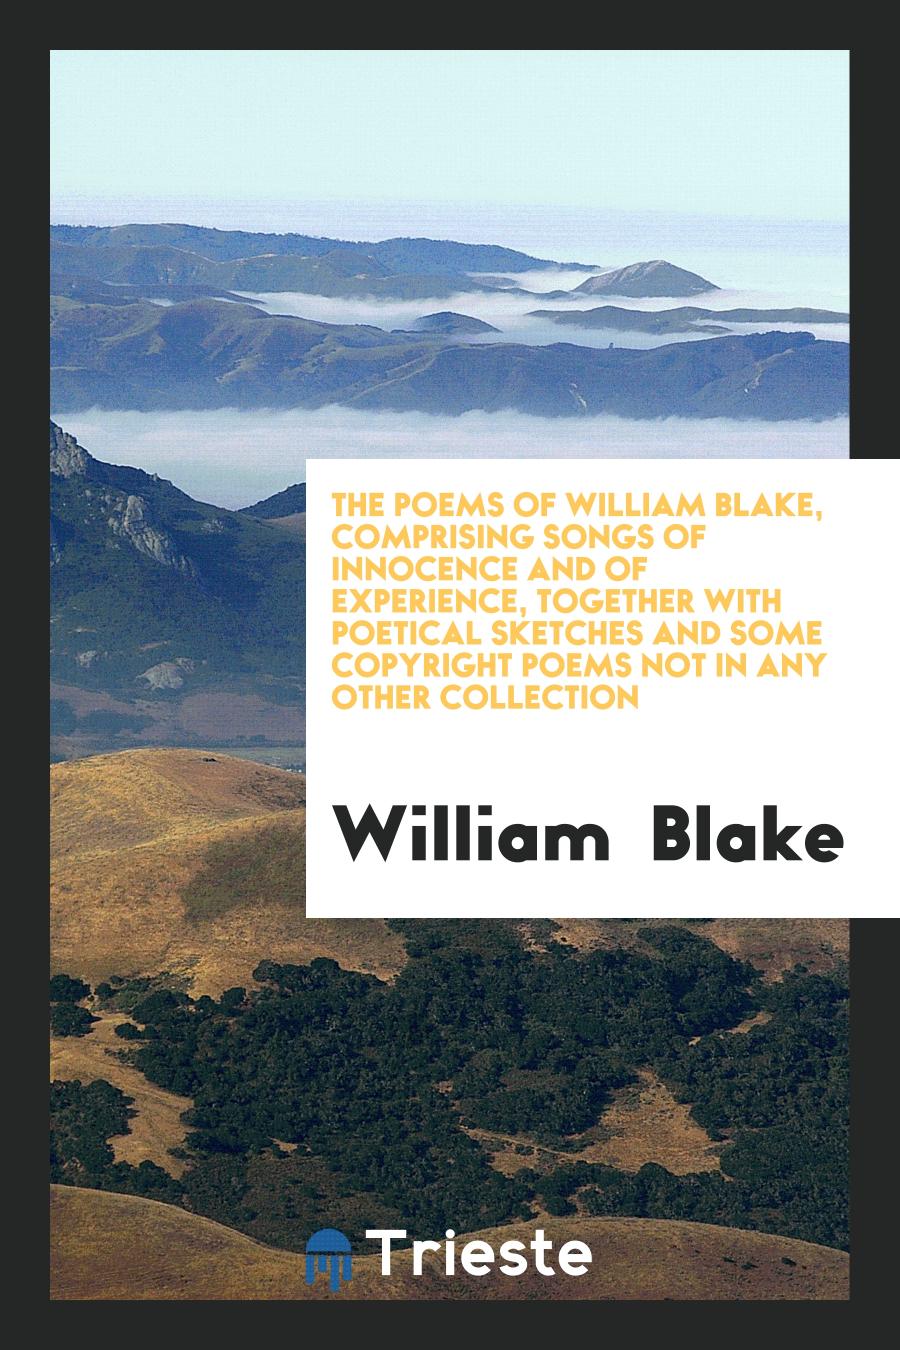 The Poems of William Blake, Comprising Songs of Innocence and of Experience, Together with Poetical Sketches and Some Copyright Poems Not in Any Other Collection